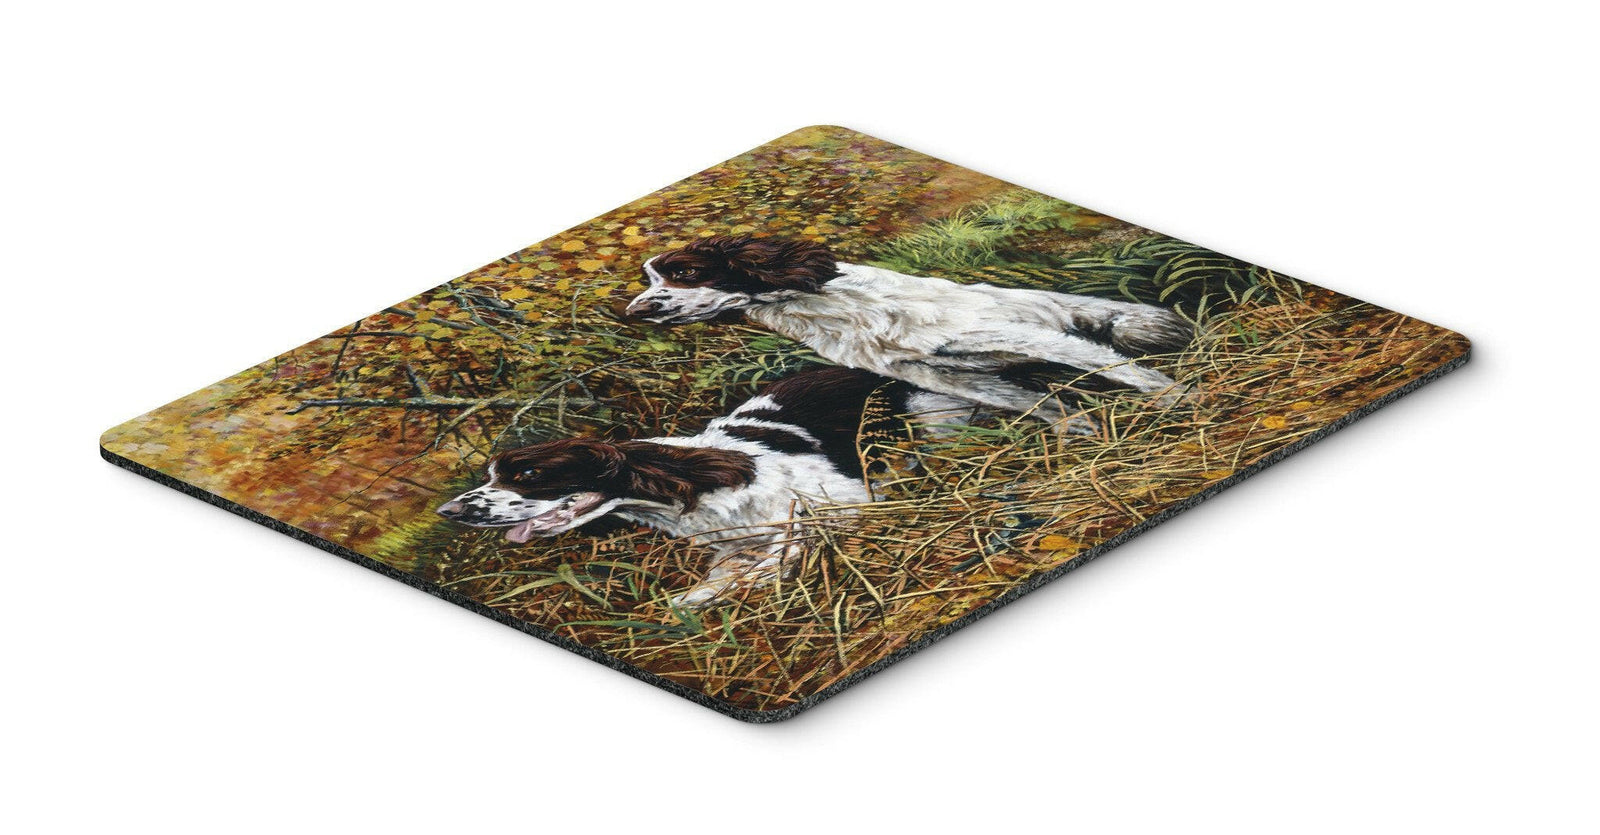 Two Springer Spaniels in the grasses Mouse Pad, Hot Pad or Trivet HMHE0002MP by Caroline's Treasures